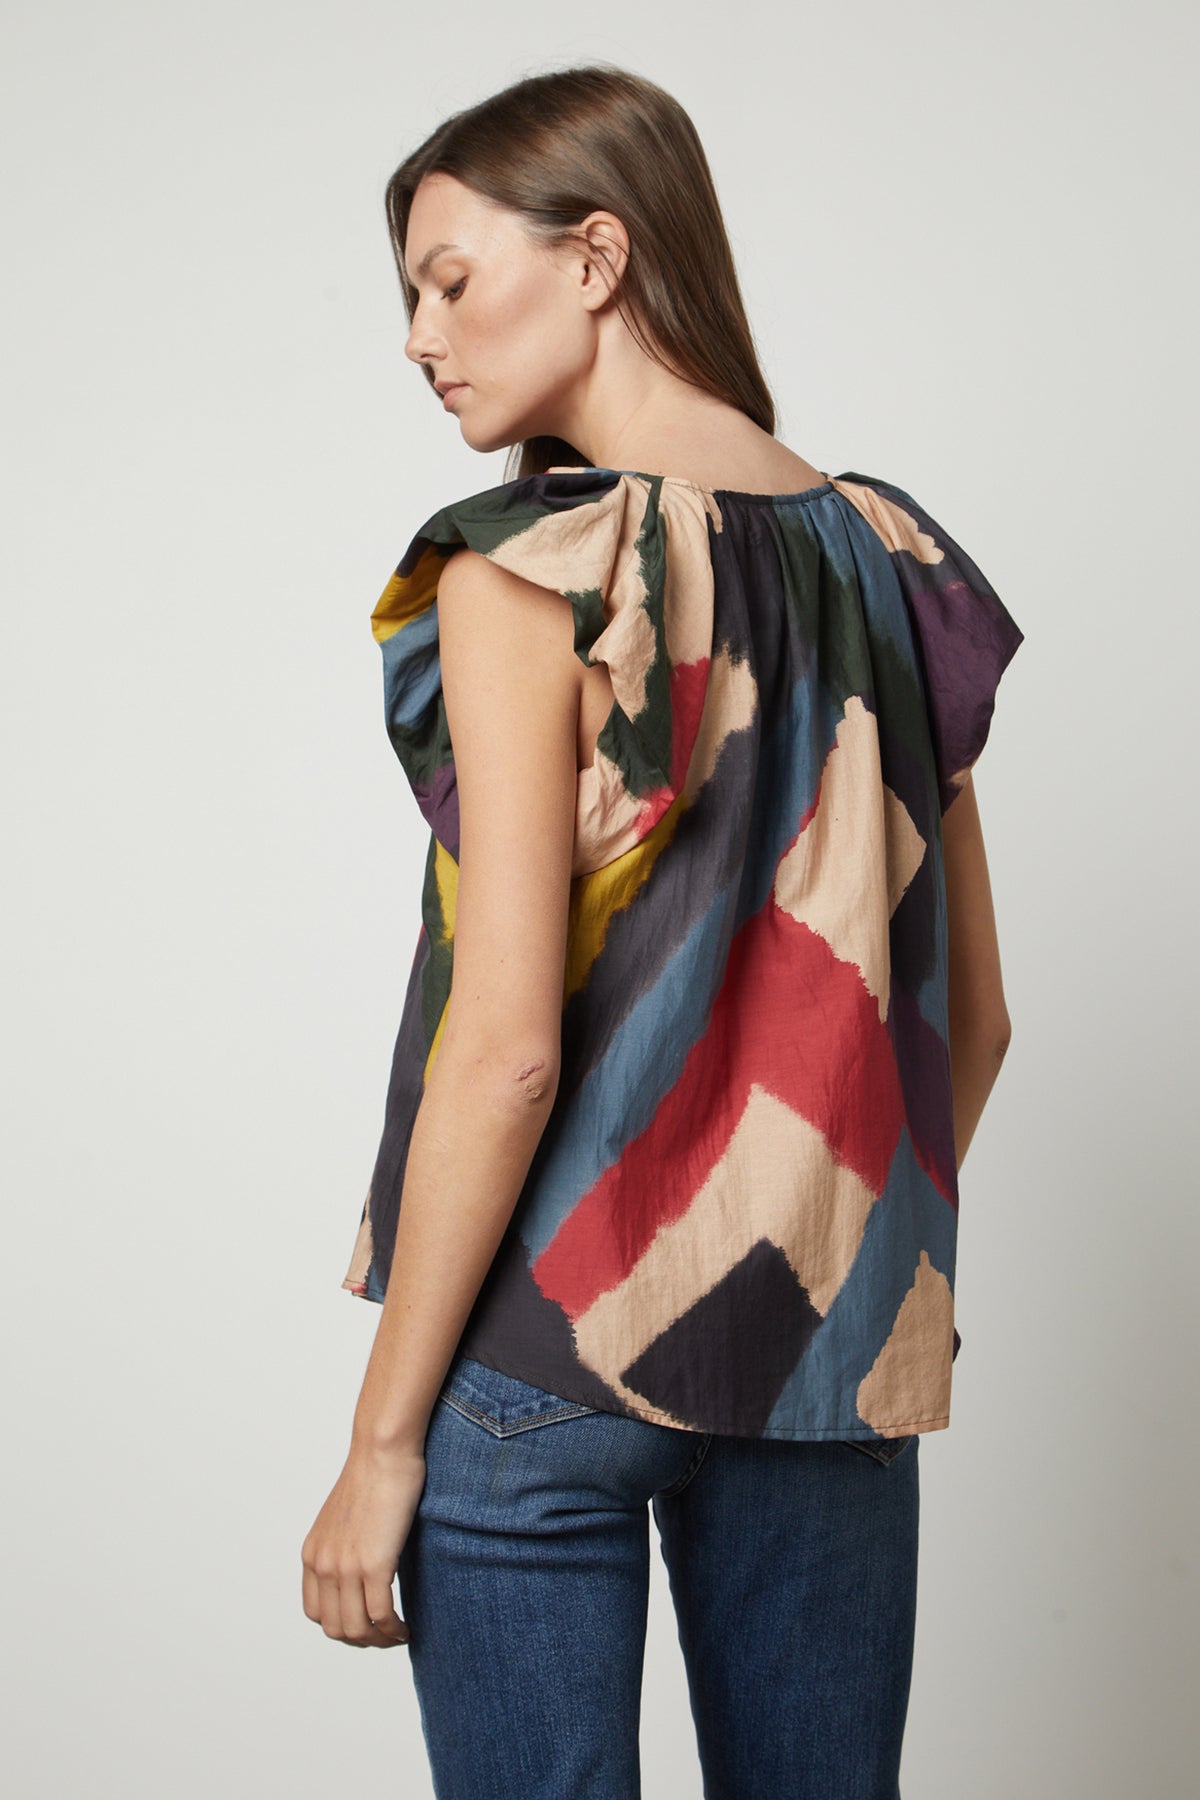 The back view of a woman wearing a Velvet by Graham & Spencer TAMARA PRINTED TOP with flutter sleeves and multi colored design.-35655953842369